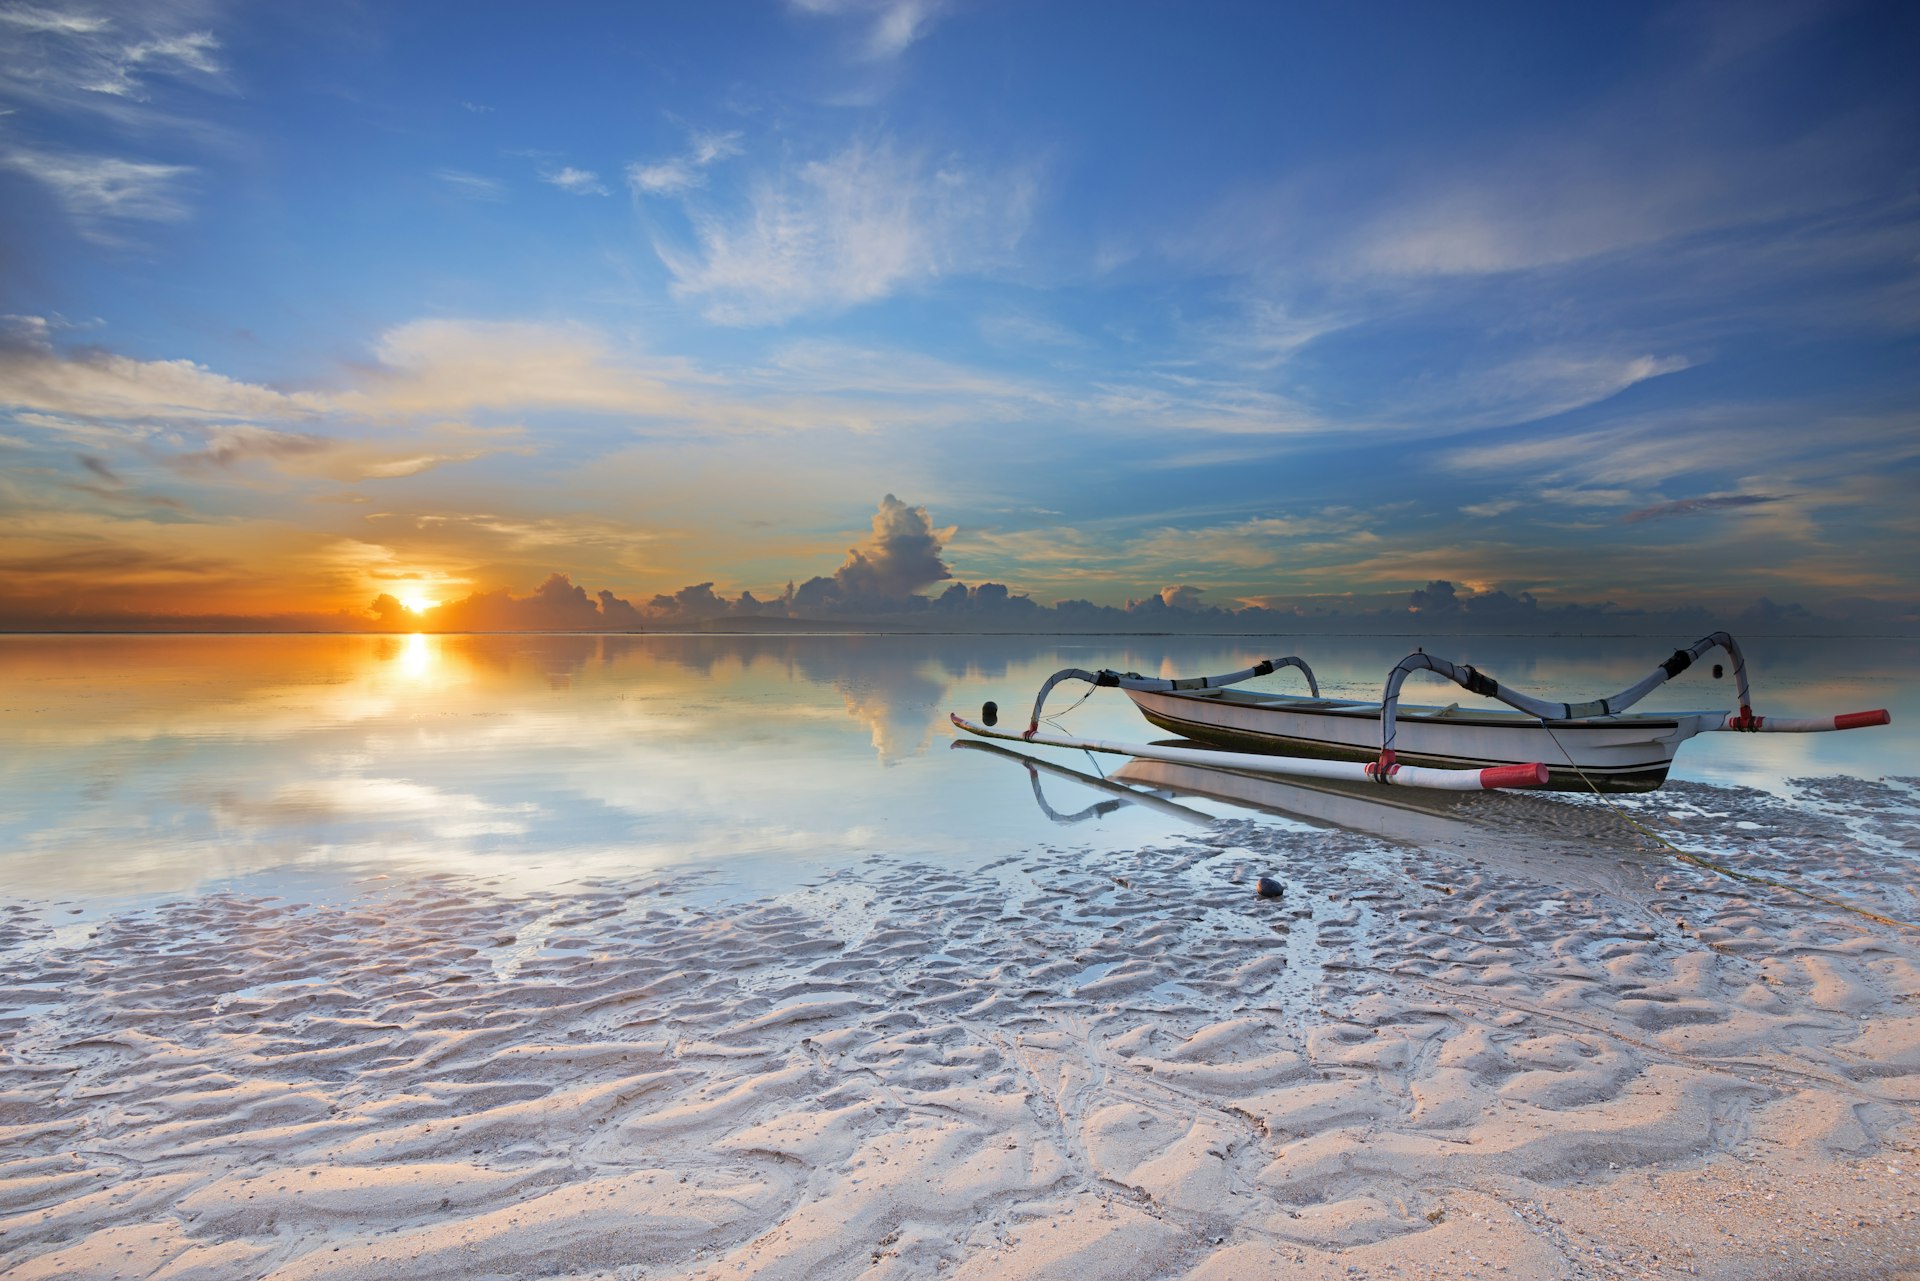 Boat on the white sands of Sanur Beach at sunrise in Bali, Indonesia